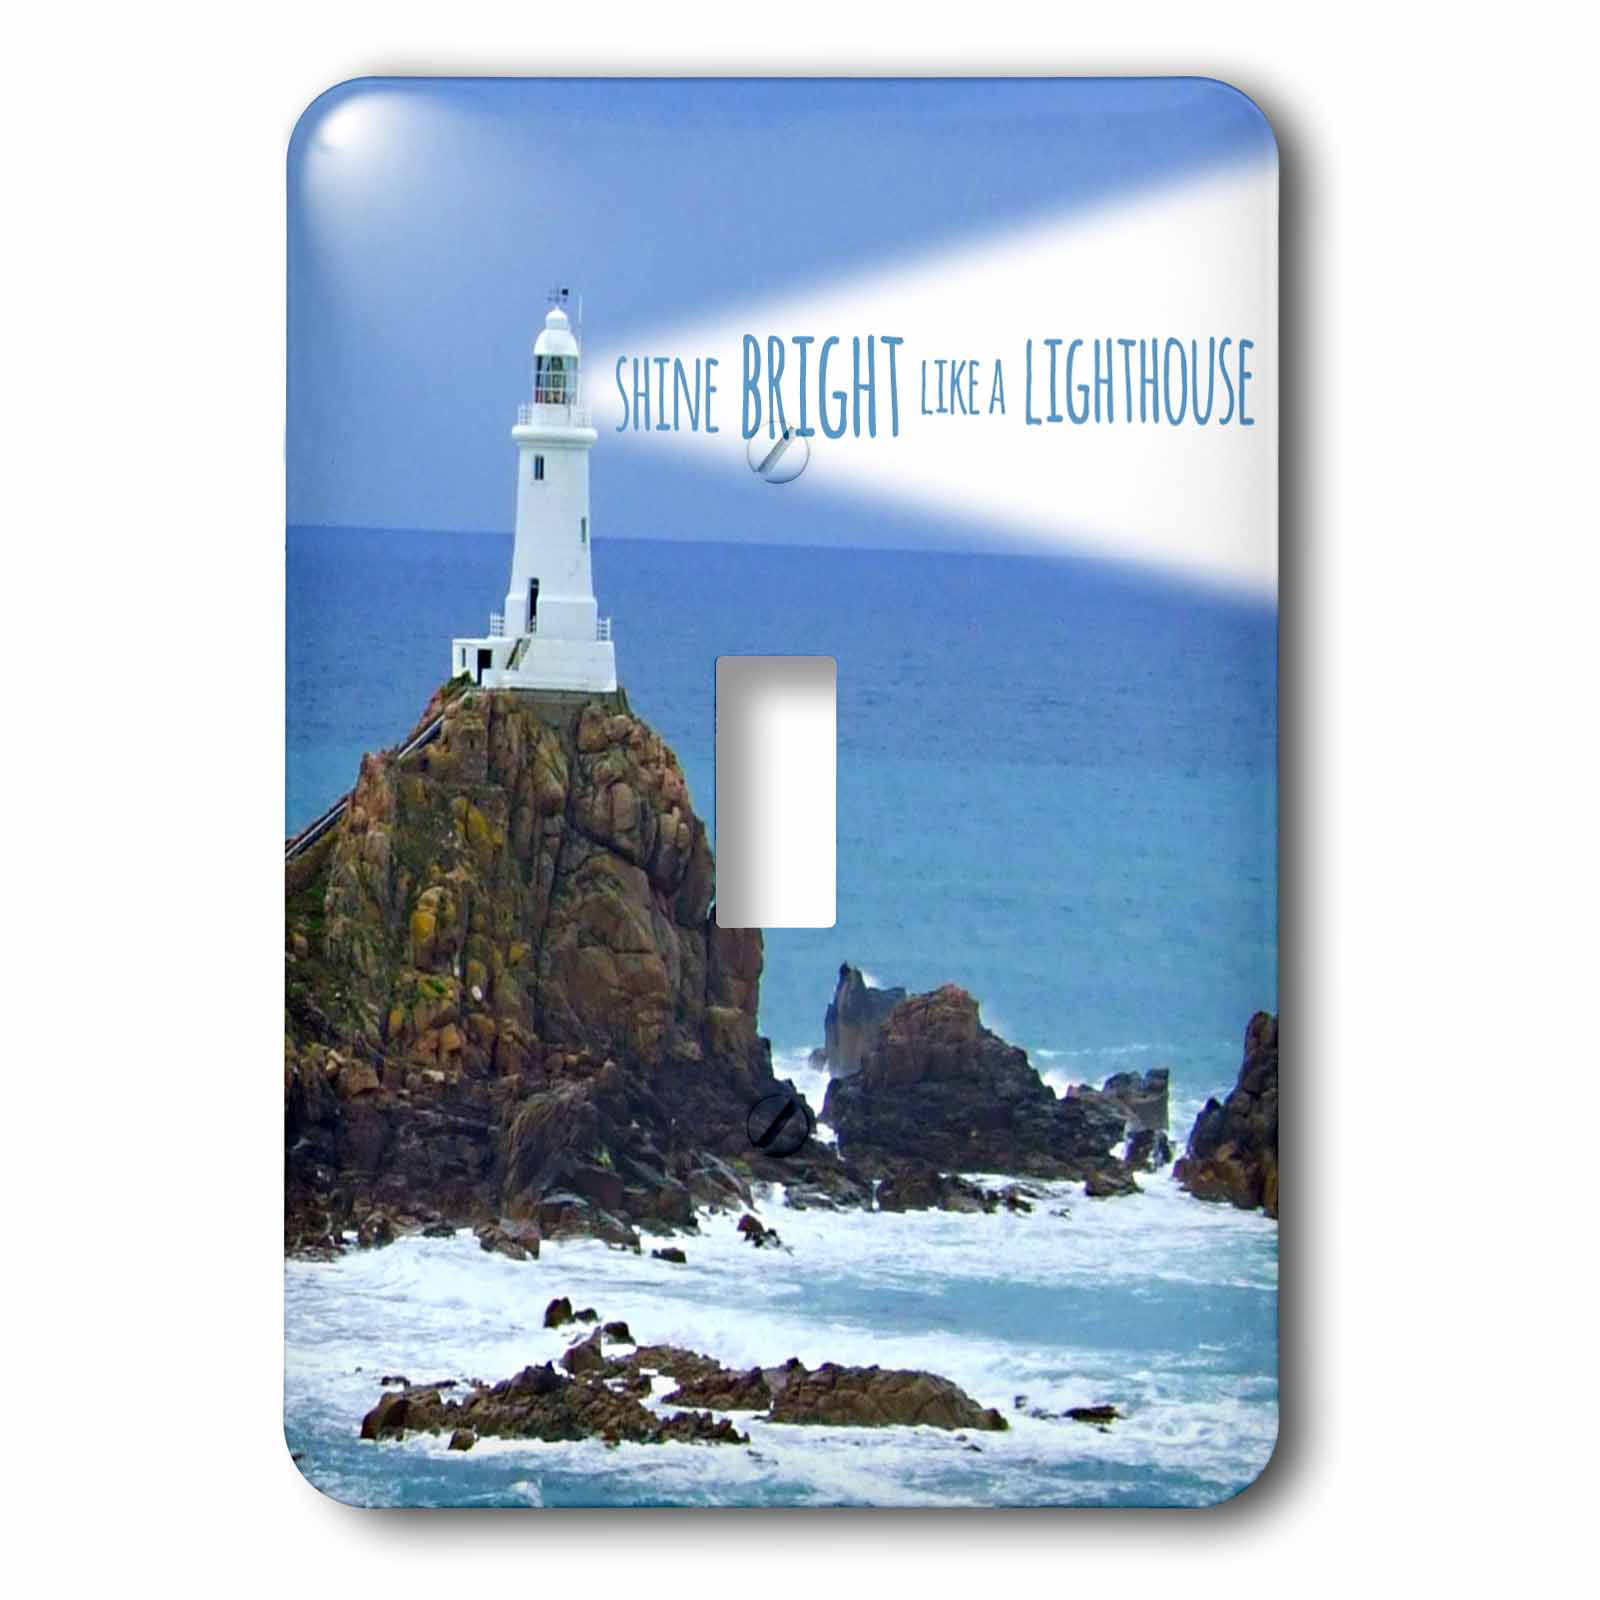 Inspiring Motivational Motivating Nautical Word Saying Light House 2 Plug Outlet Cover 3dRose lsp_155658_6 Shine Bright Like A Lighthouse 